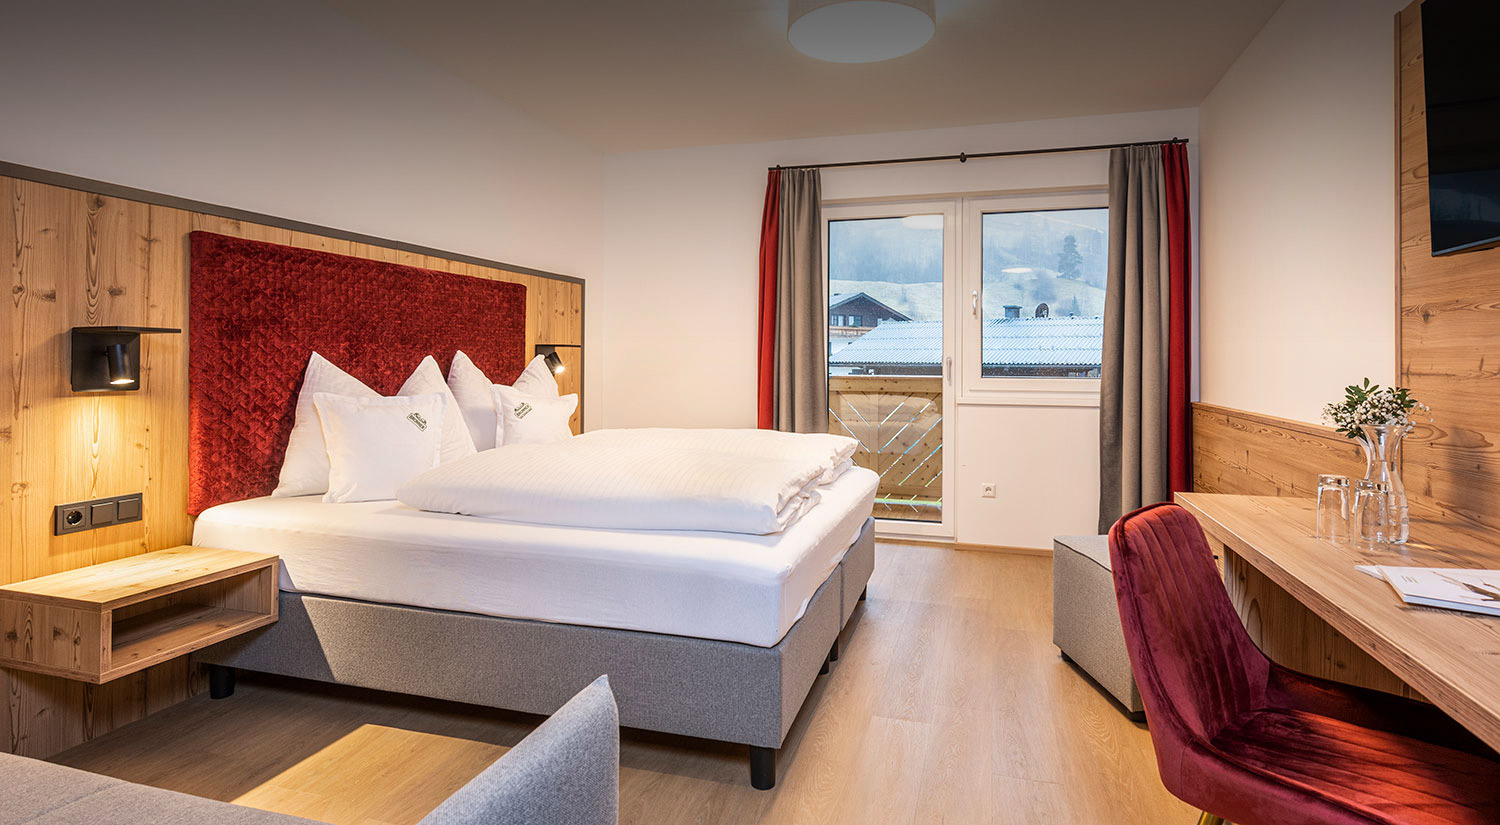 Beautiful rooms in the Hotel Brunner in Gleiming at the Reiteralm mountain